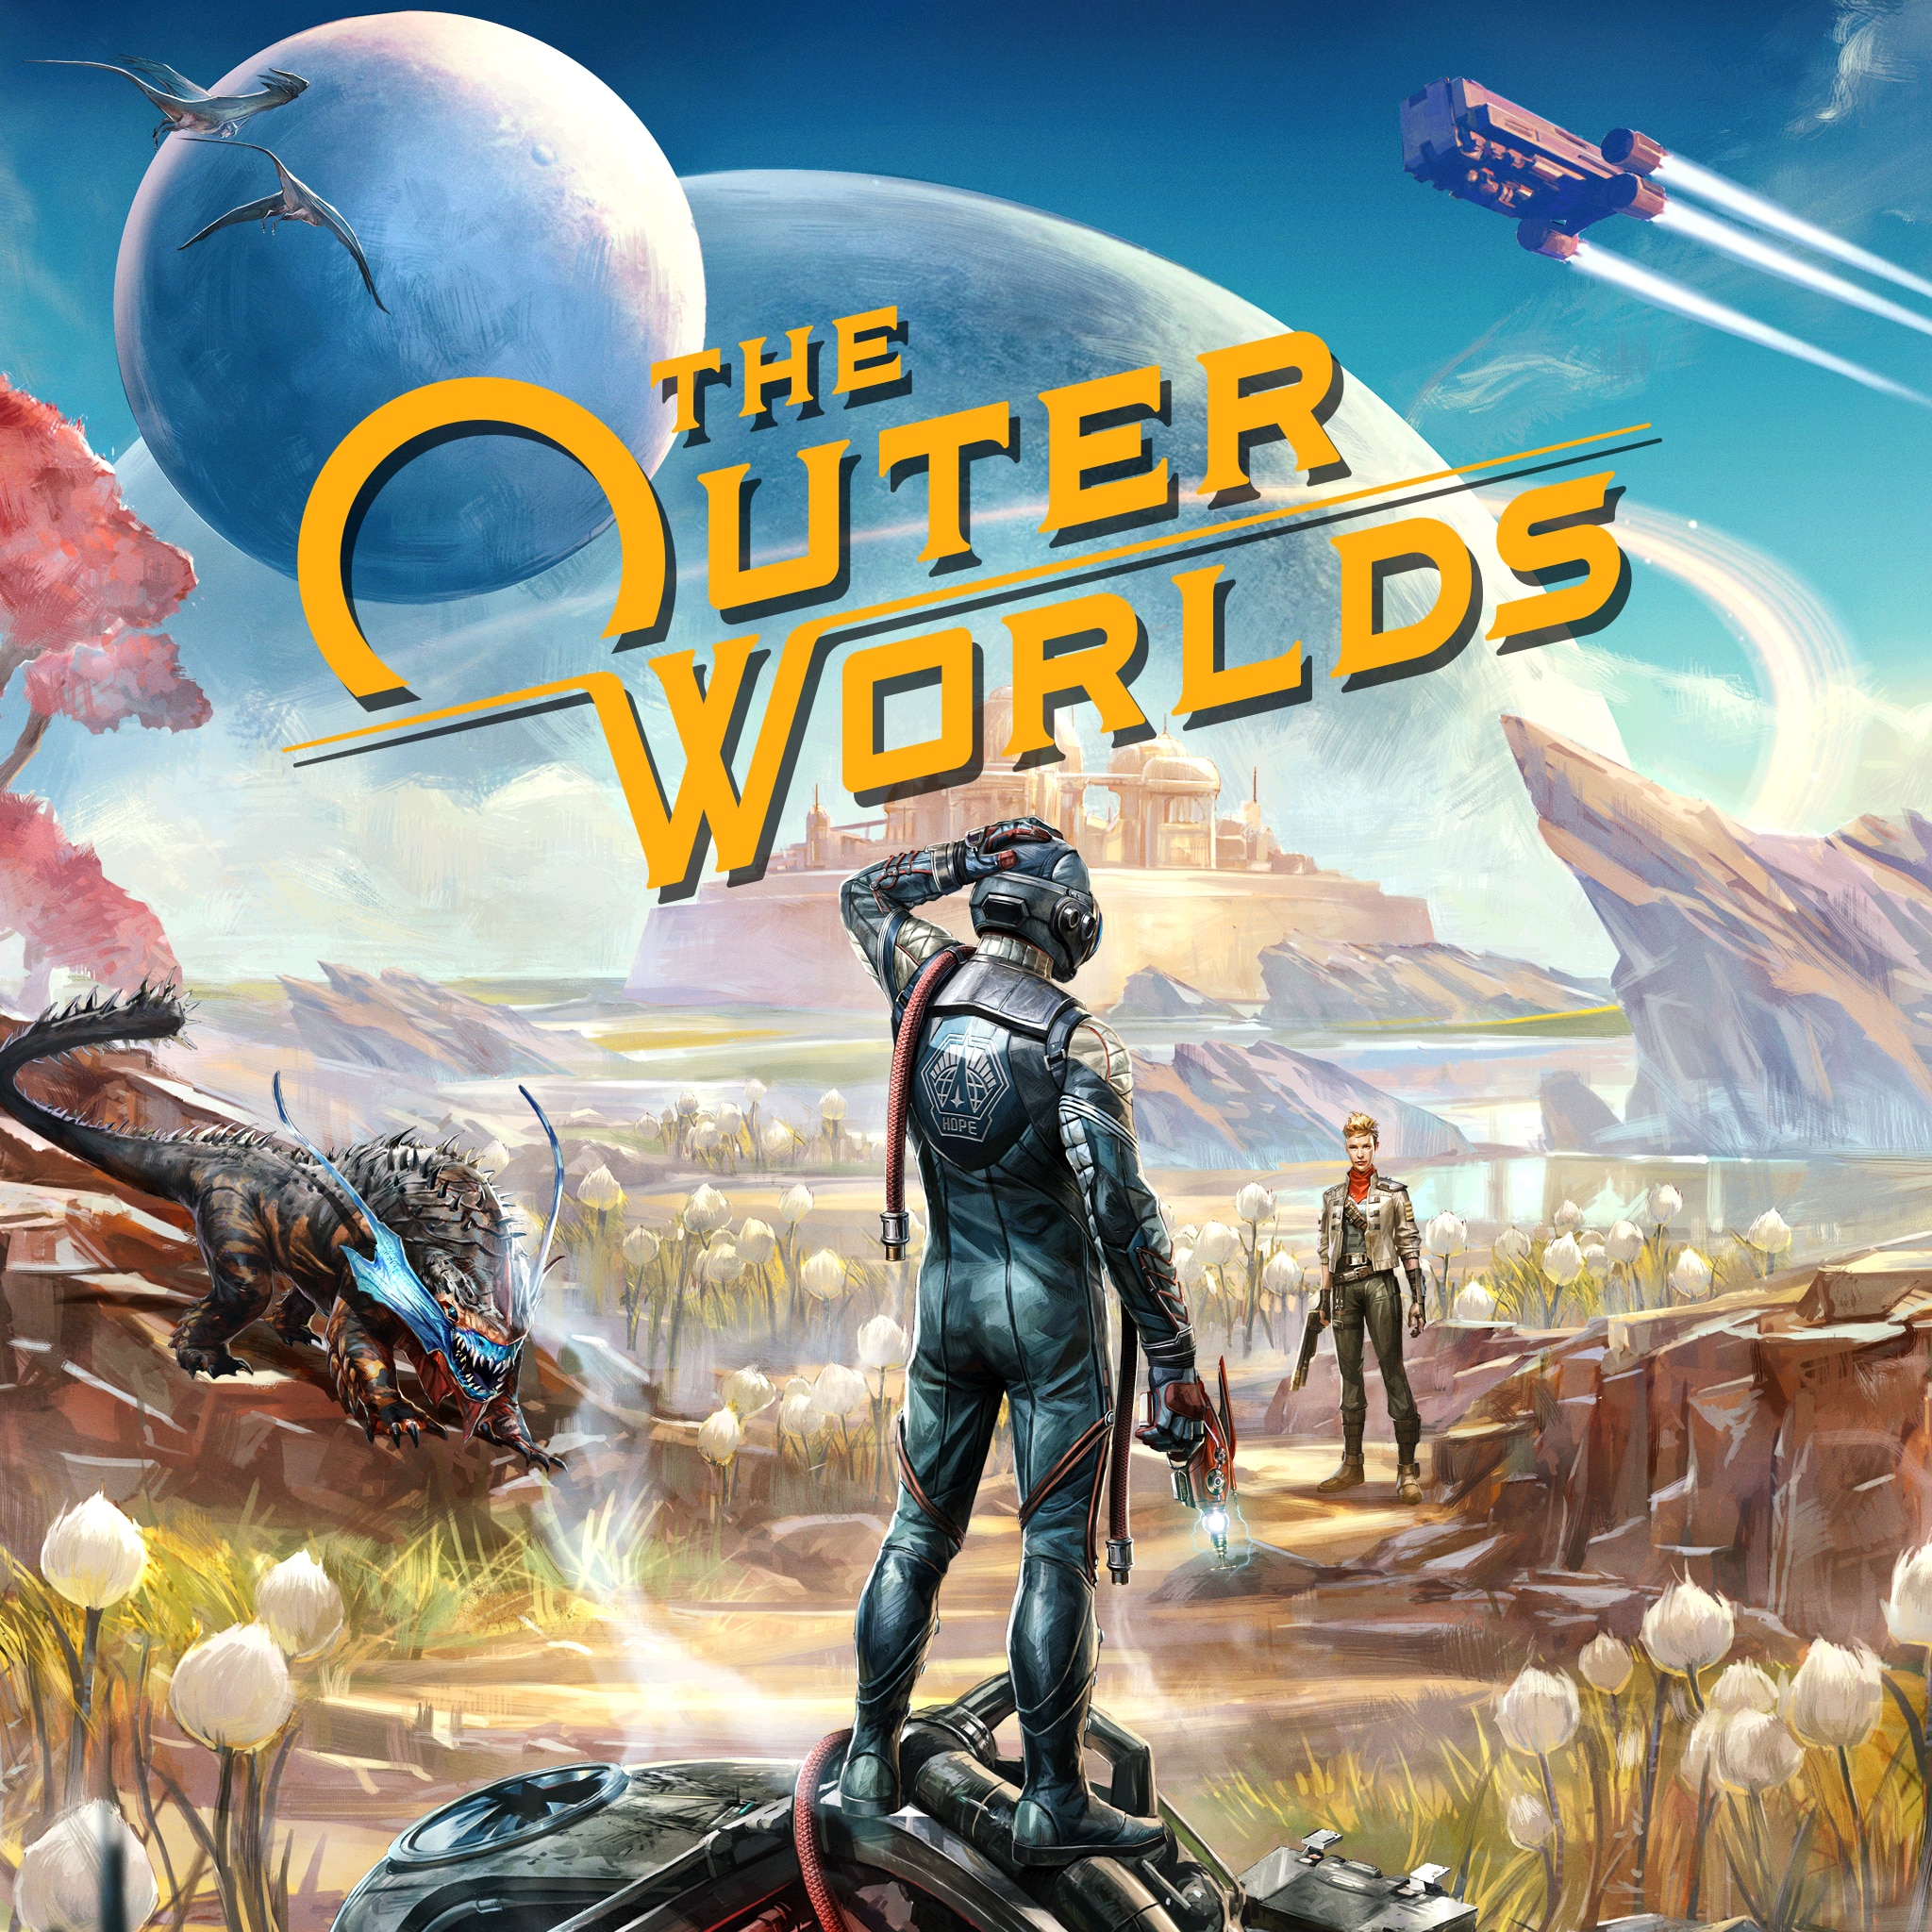 The Outer Worlds (Xbox One X/S - Region Free), Platform: Xbox One X / S, Region: All Countries, Language: Multi-language